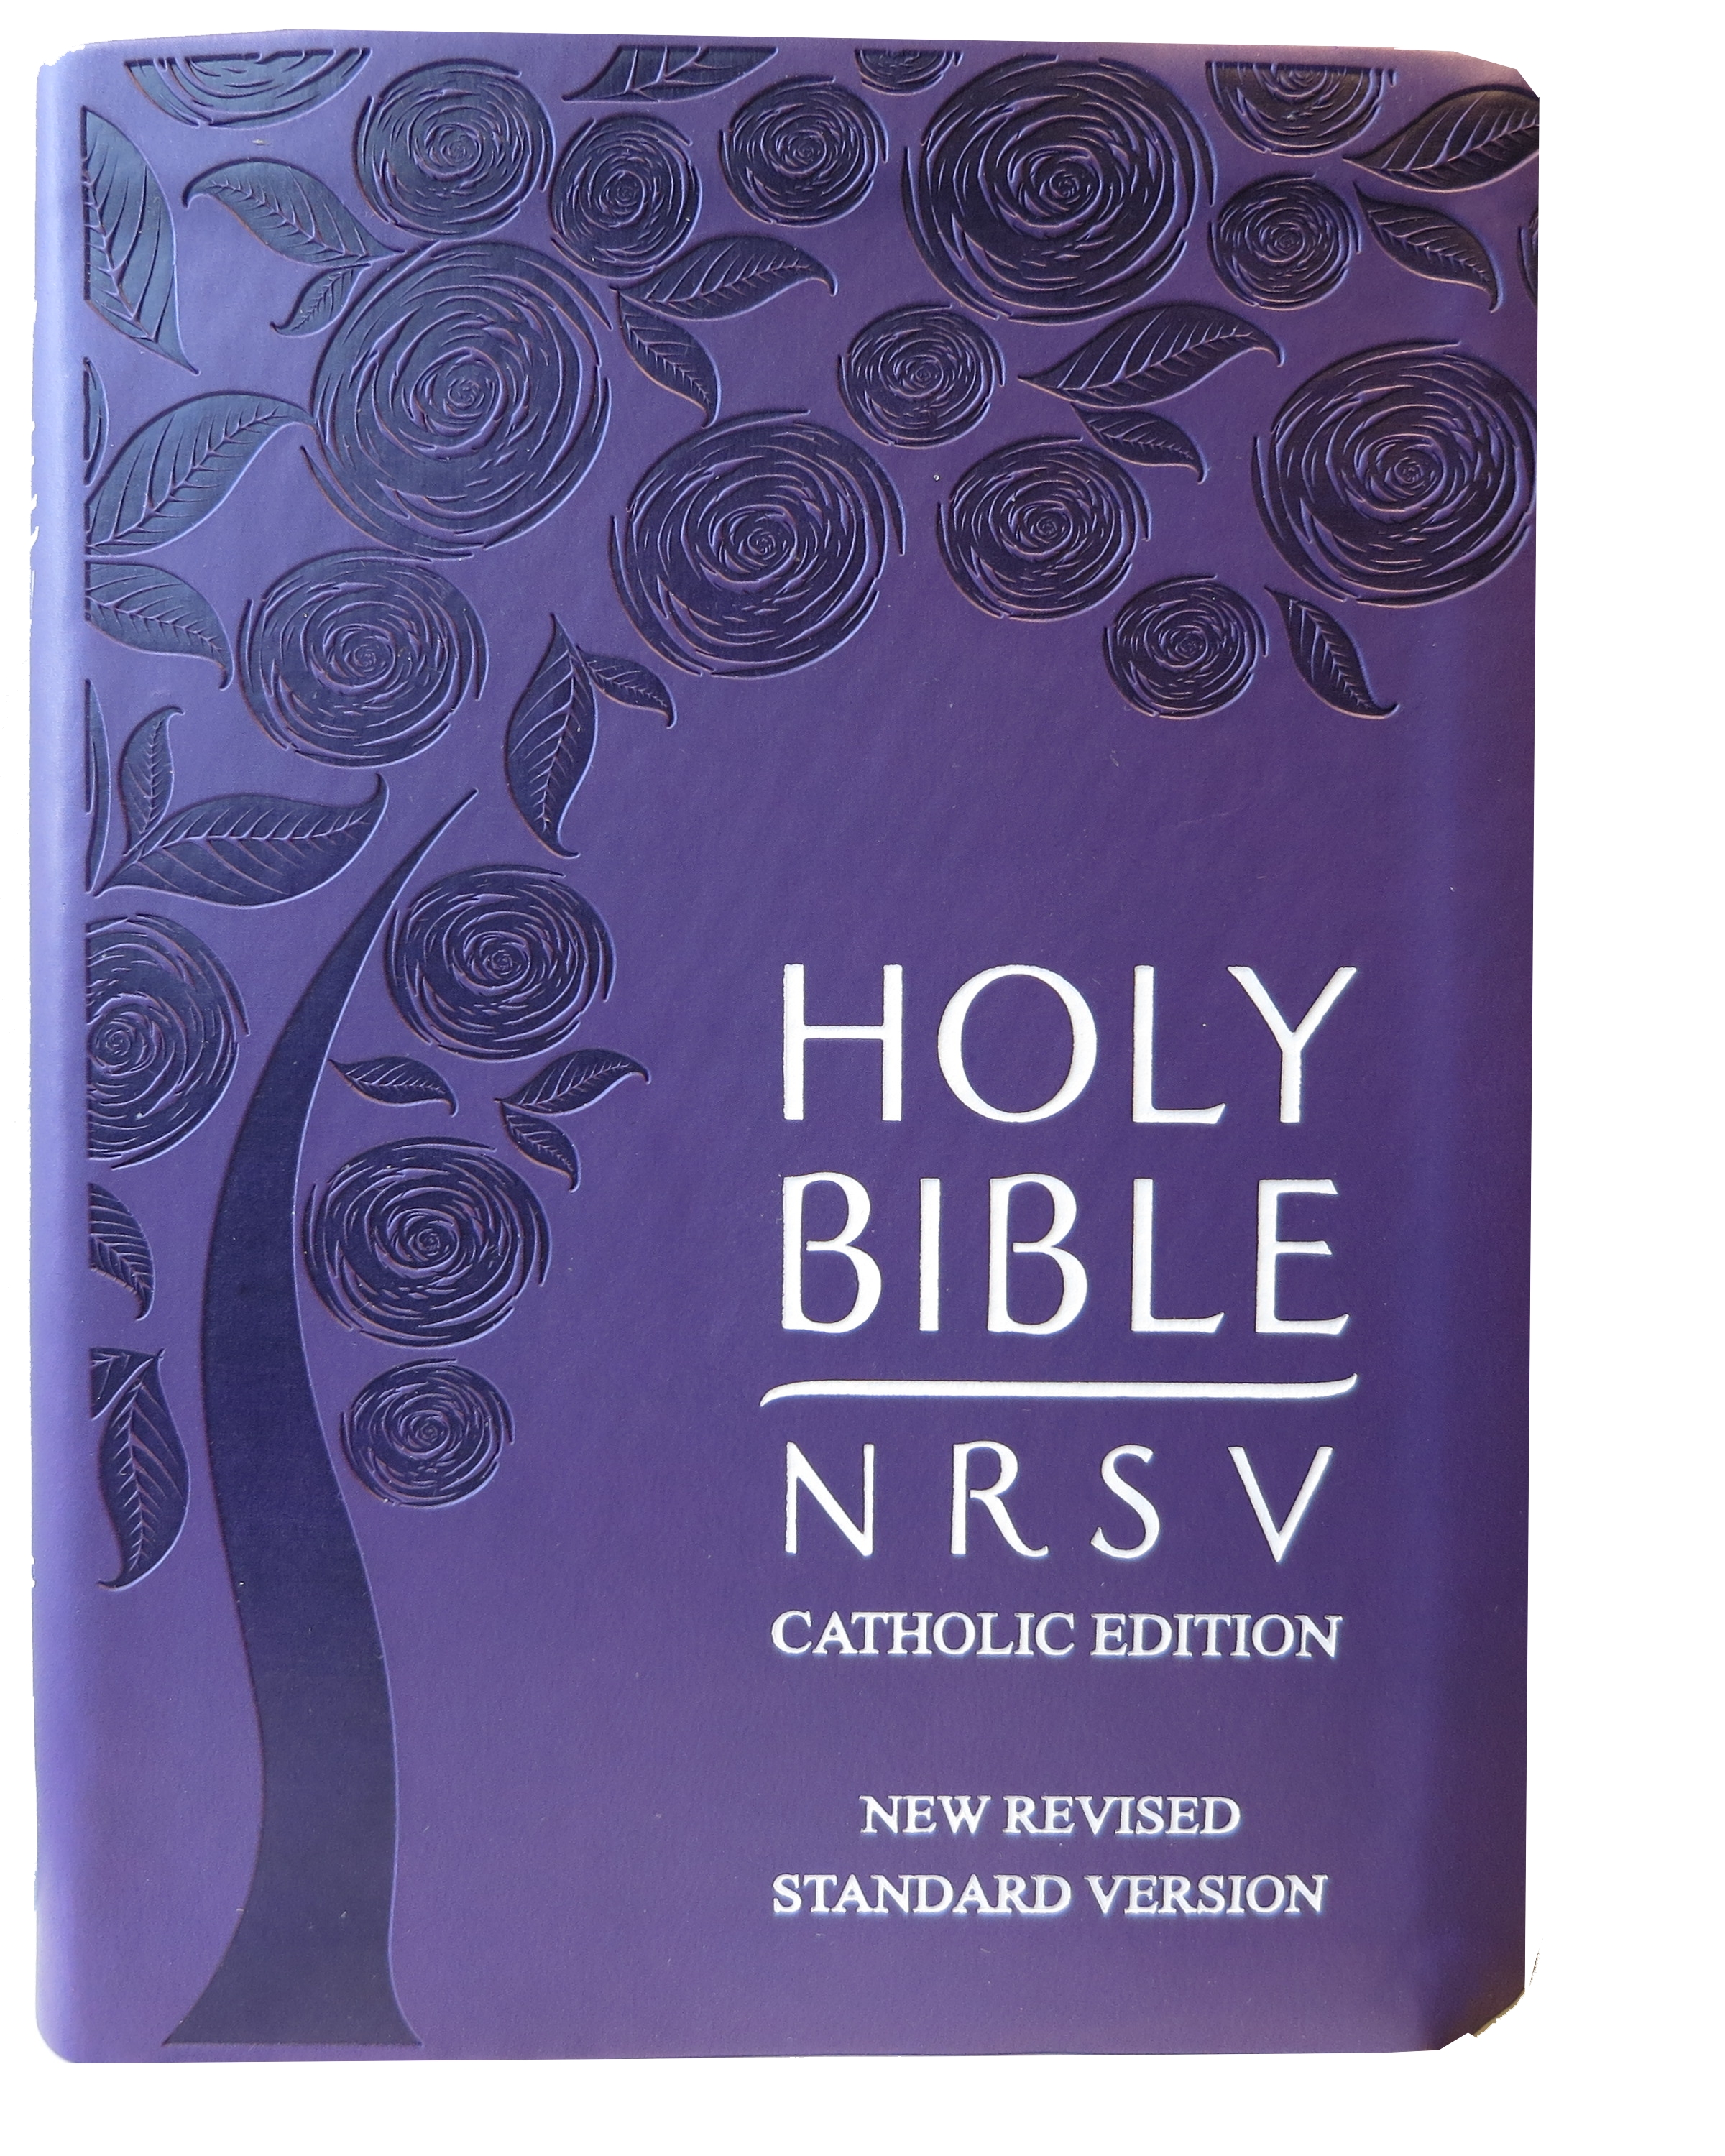 New Revised Standard Version (NRSV) Bible – Catholic Edition (Purple Softcover) 